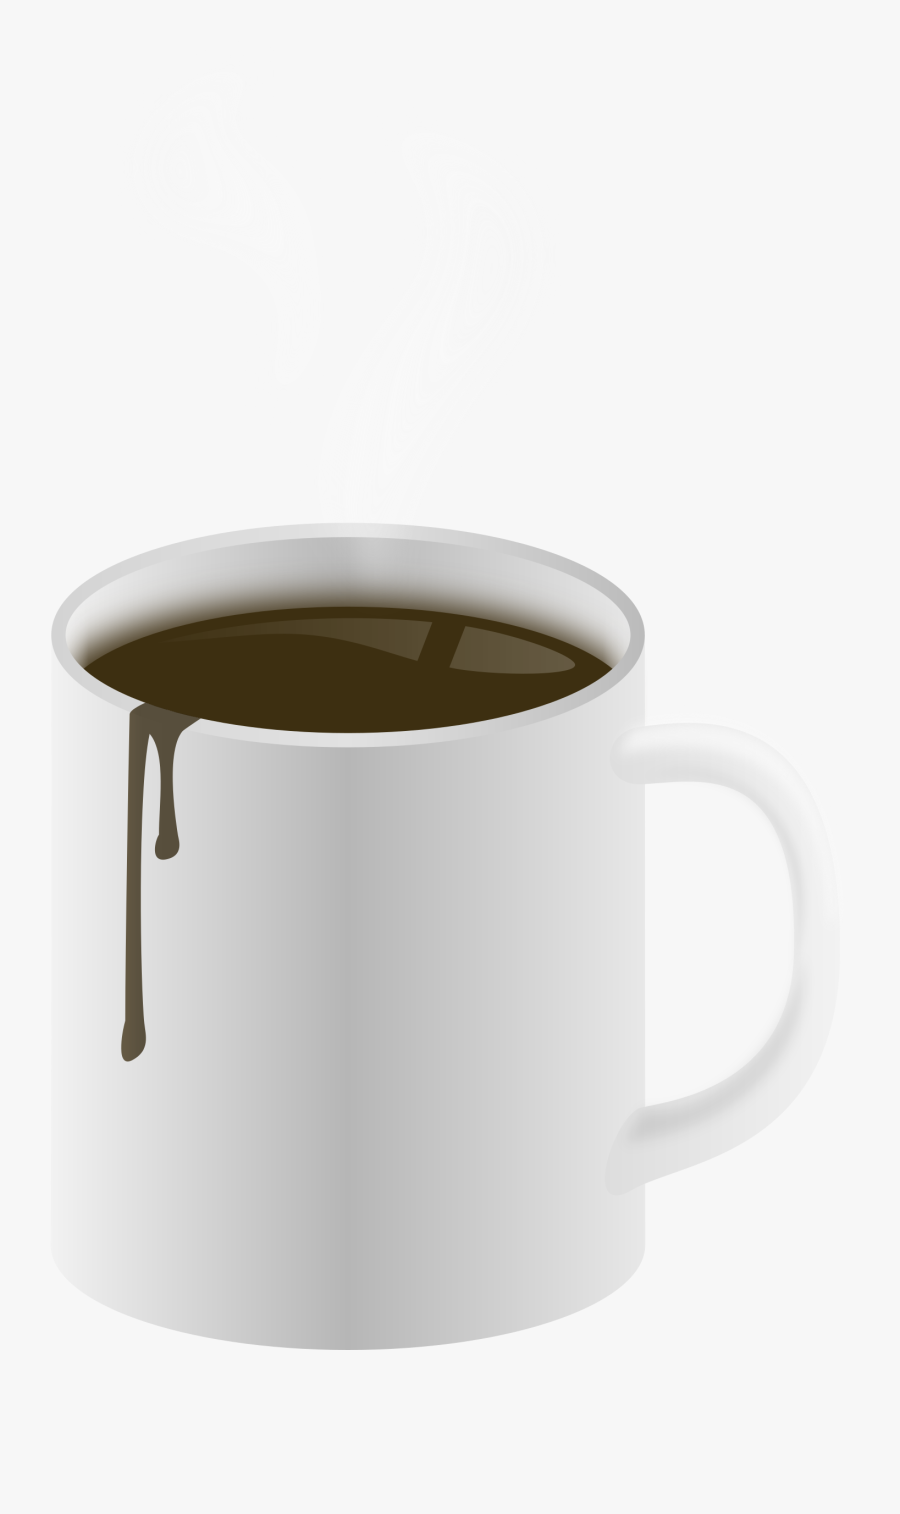 Coffee Cup 1 Clip Arts - Coffee Cup Clip Art, Transparent Clipart